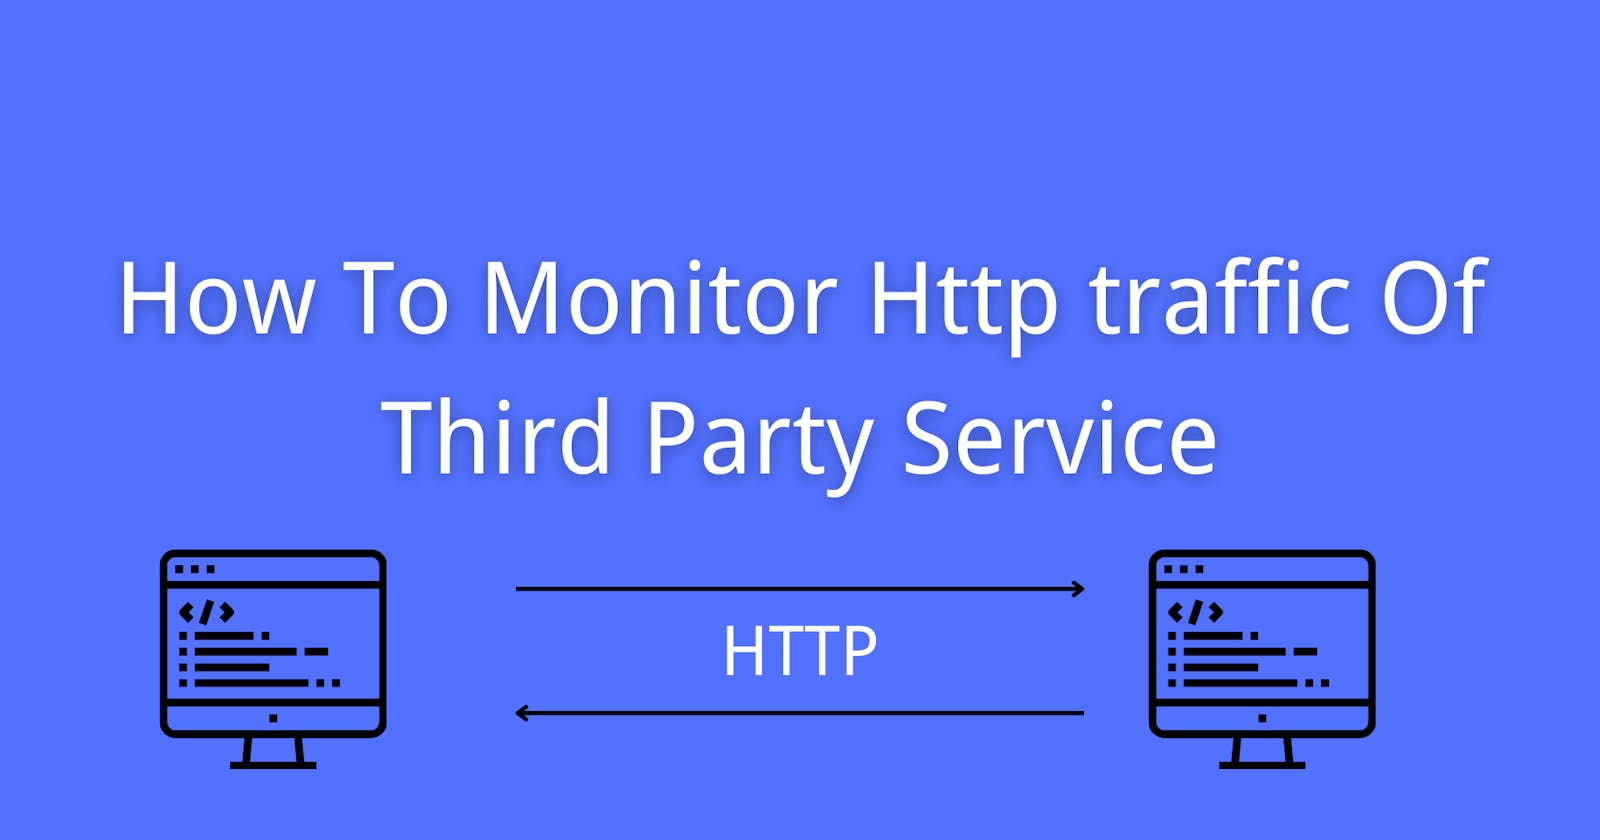 How To Monitor Http traffic Of Third Party Service